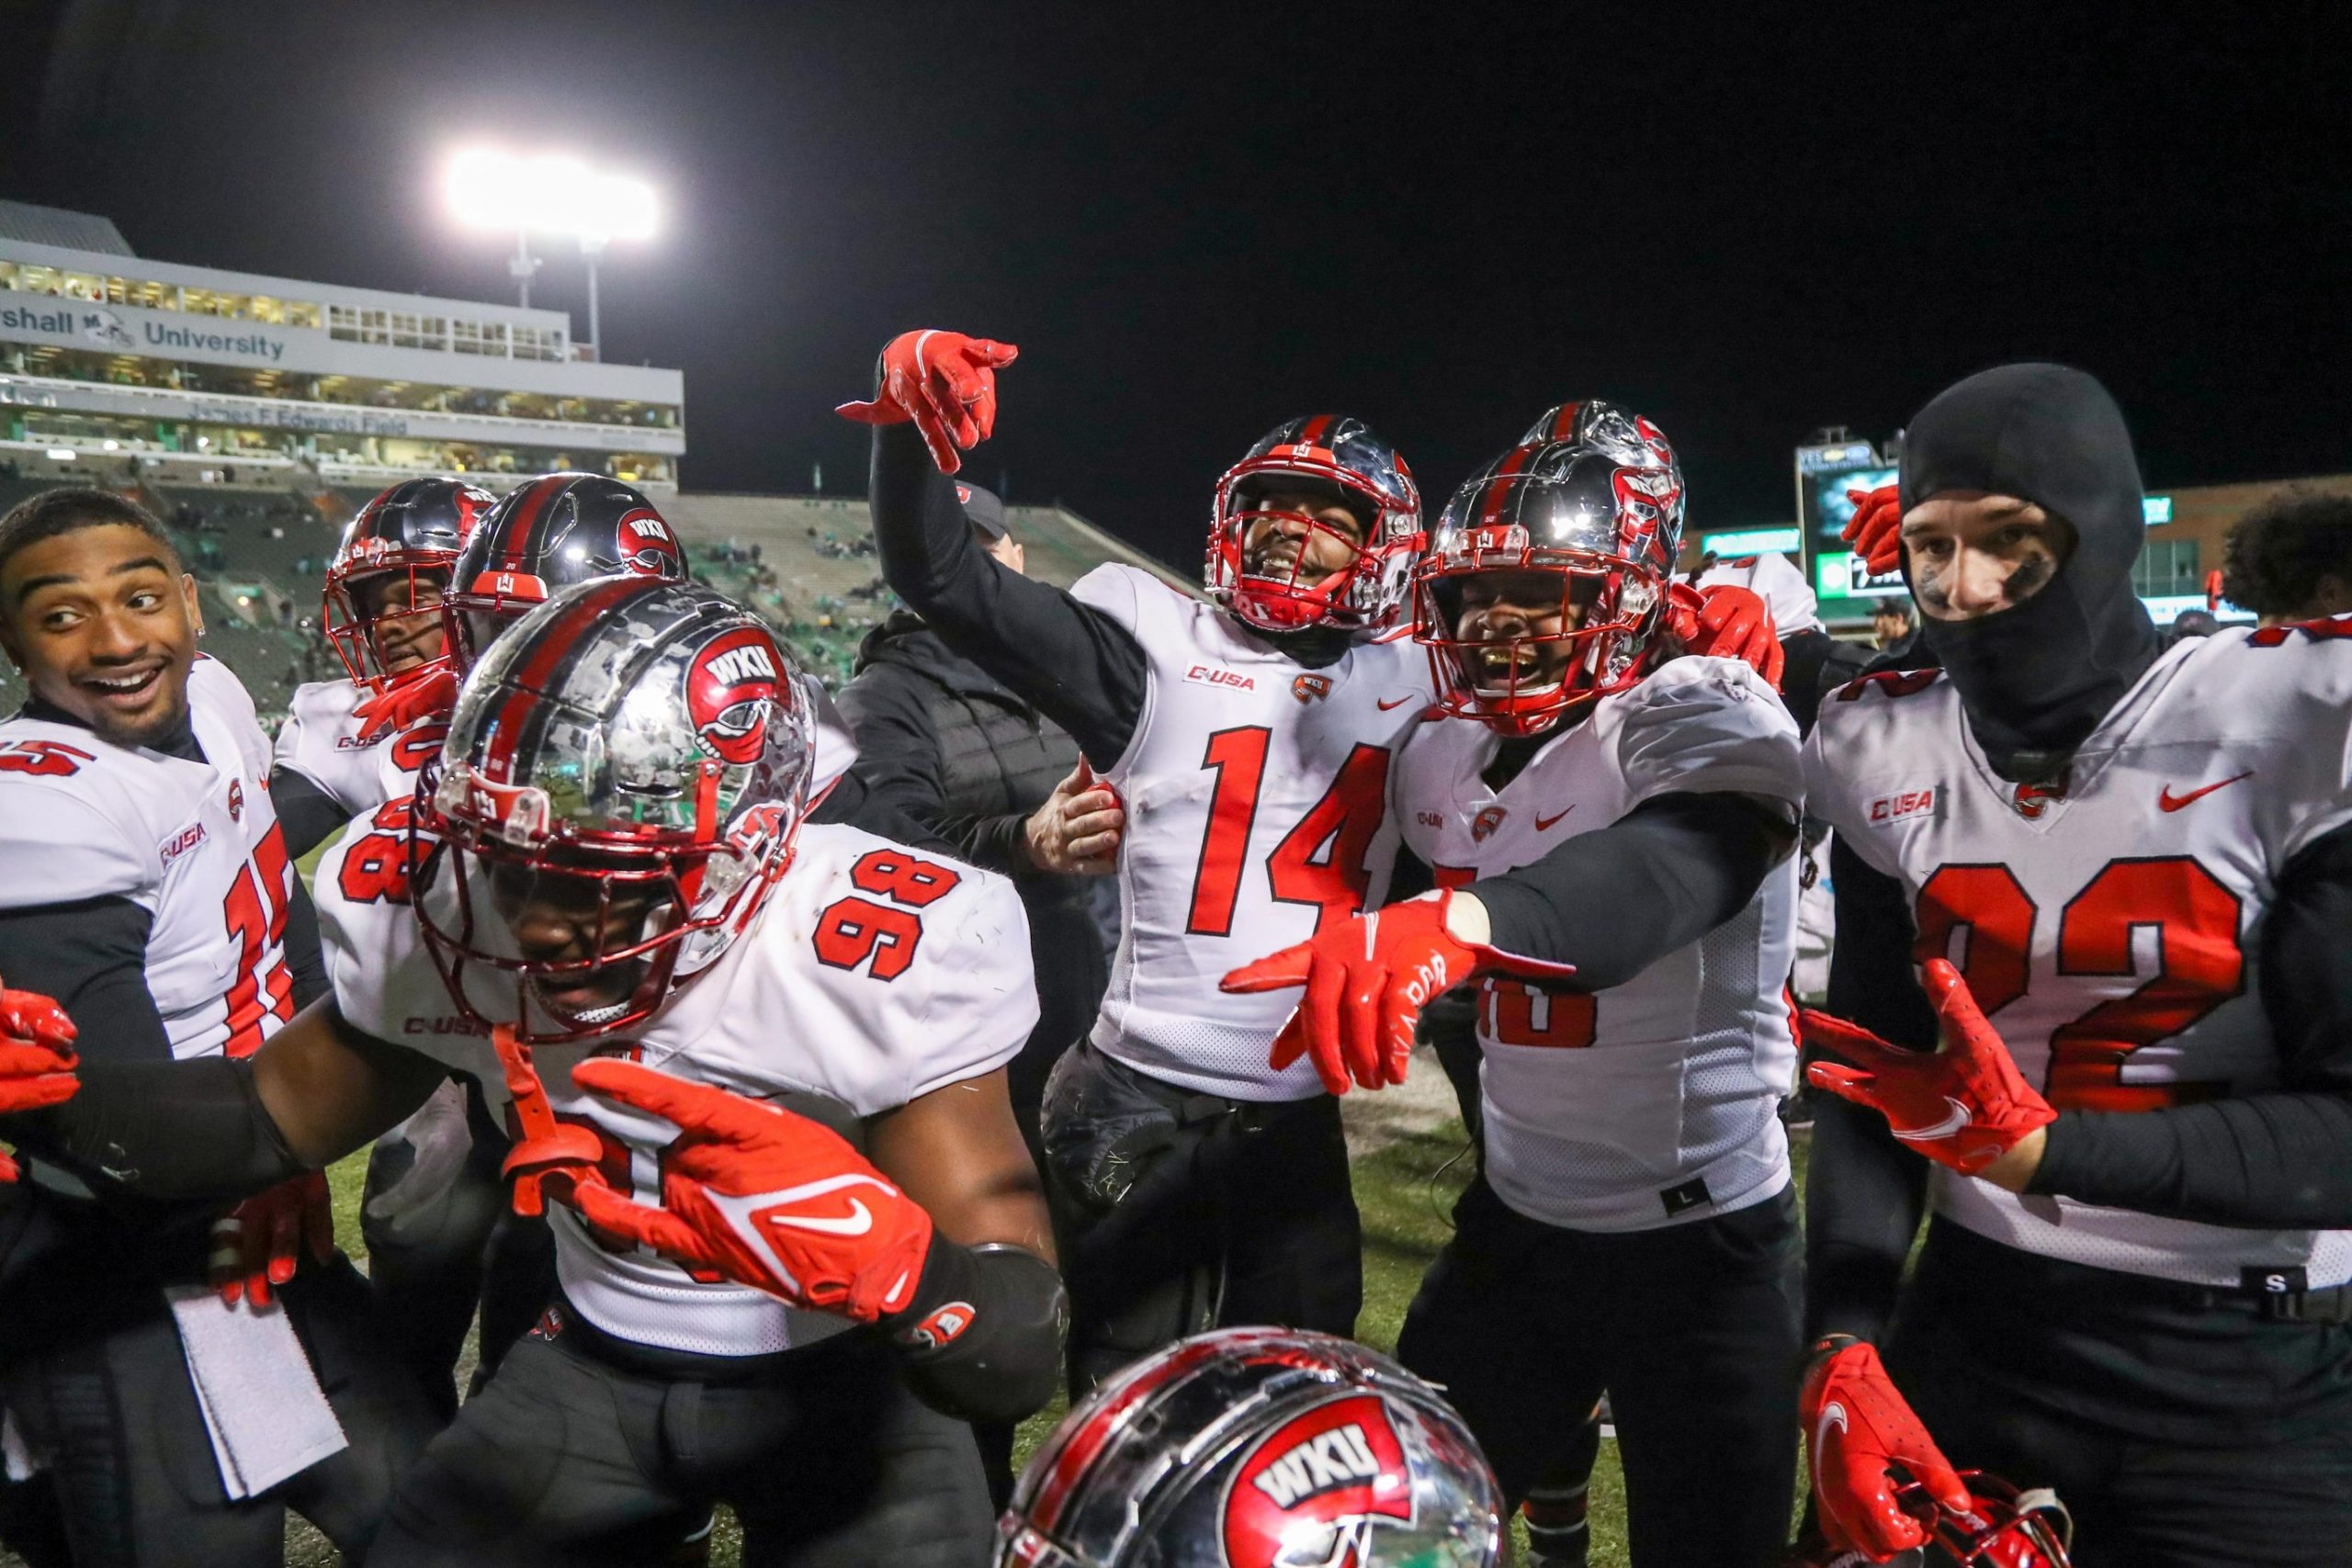 Western Kentucky Hilltoppers defensive back Davion Williams (14) celebrates with teammates after an interception for a touchdown during the fourth quarter against the Marshall Thundering Herd.